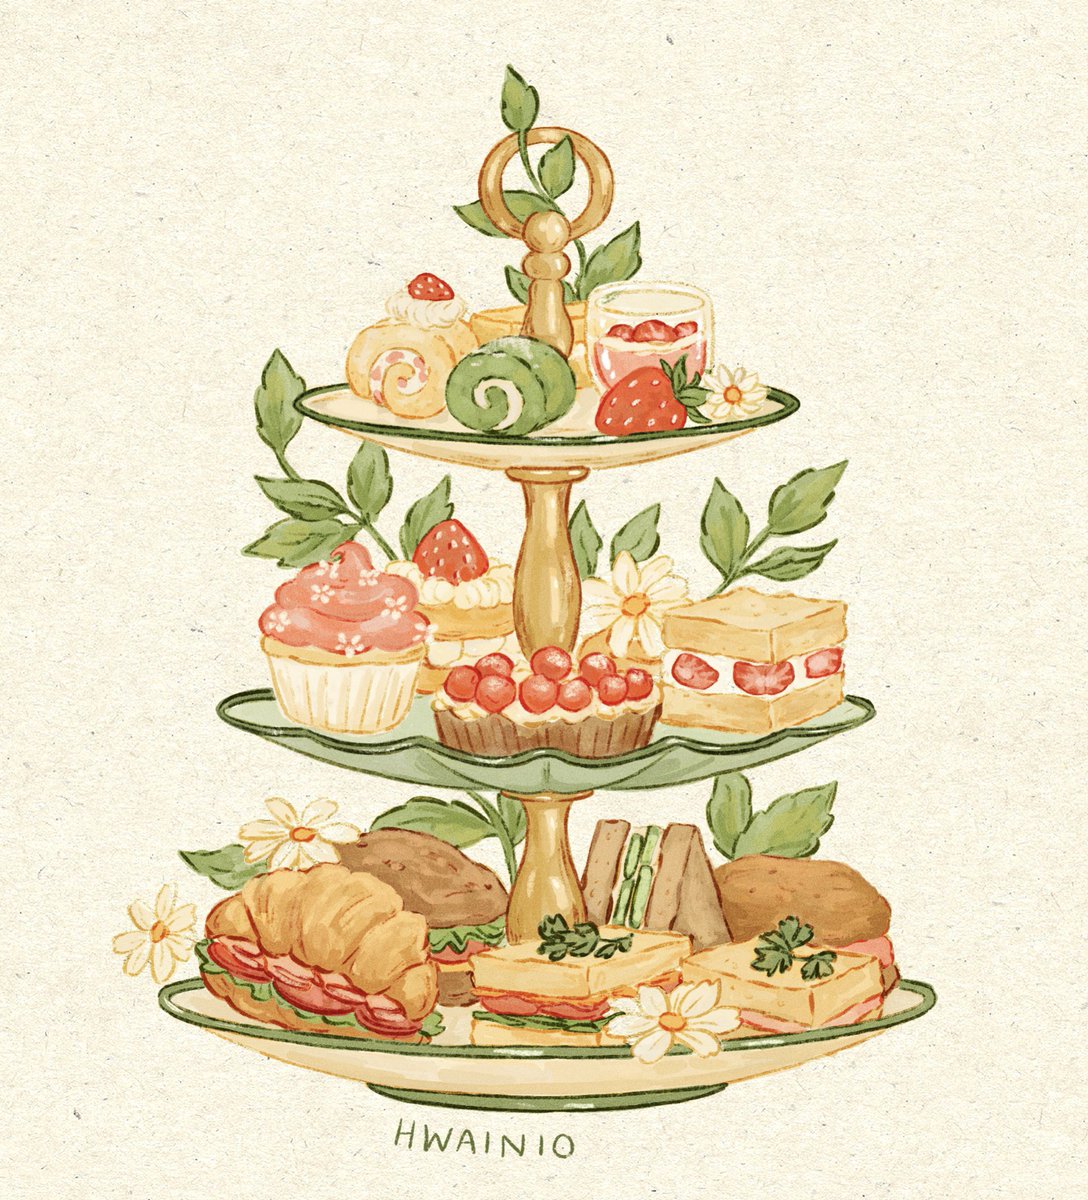 「Cake and sandwiches, yum yum! This is th」|🌿🍄 Hanna 🍄🌿 in Japan!のイラスト